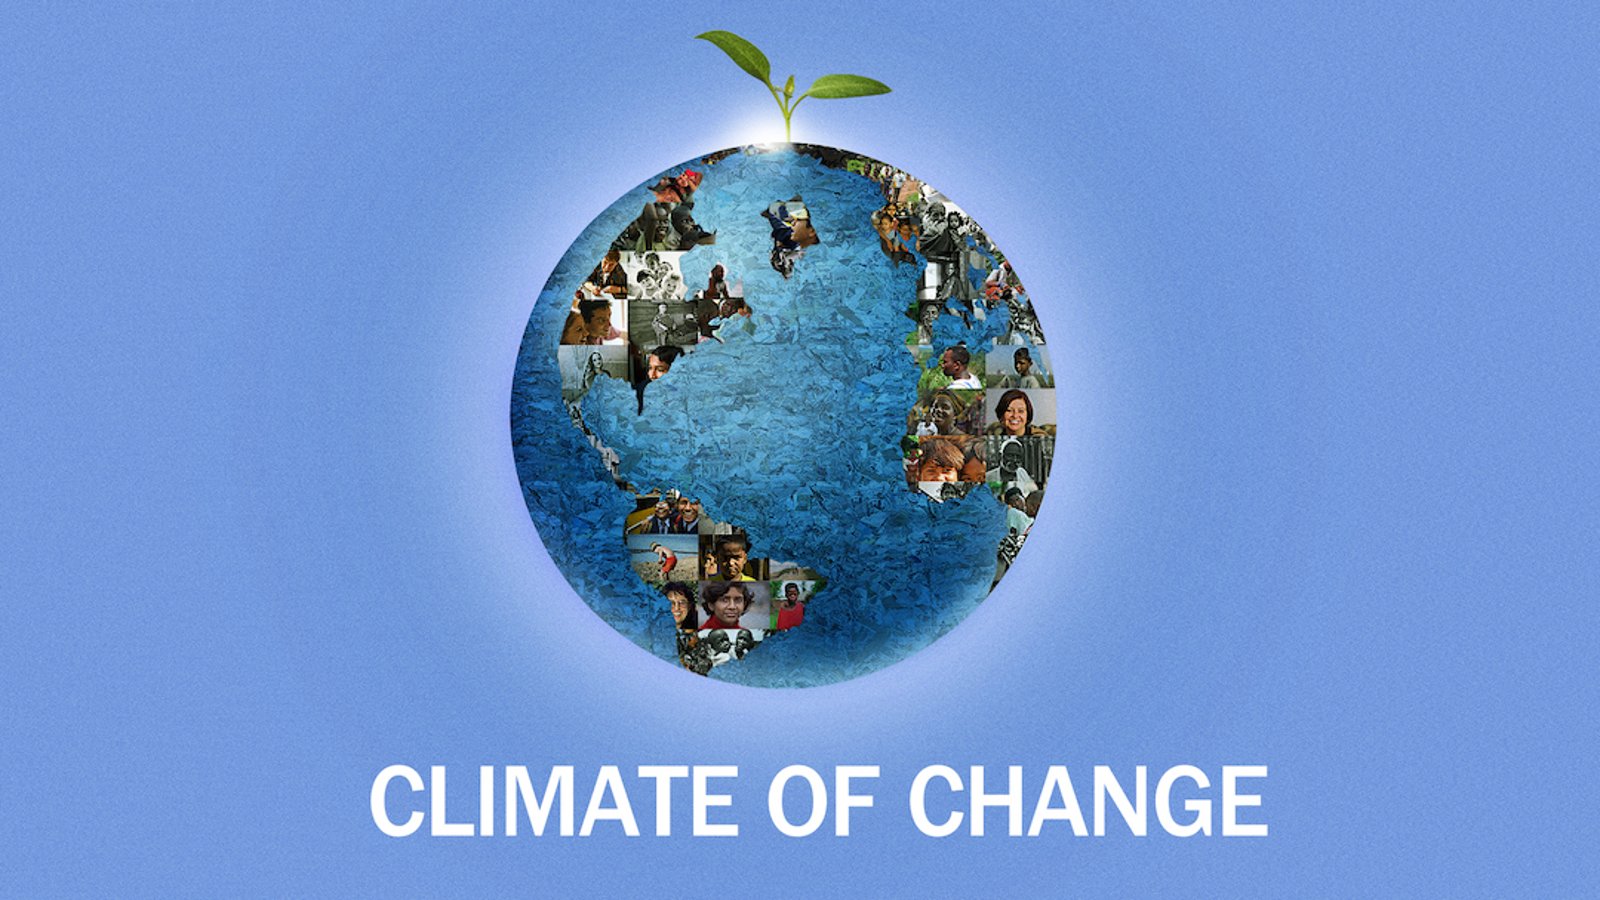 Climate of Change - People Fighting the Devastating Effects of Climate Change